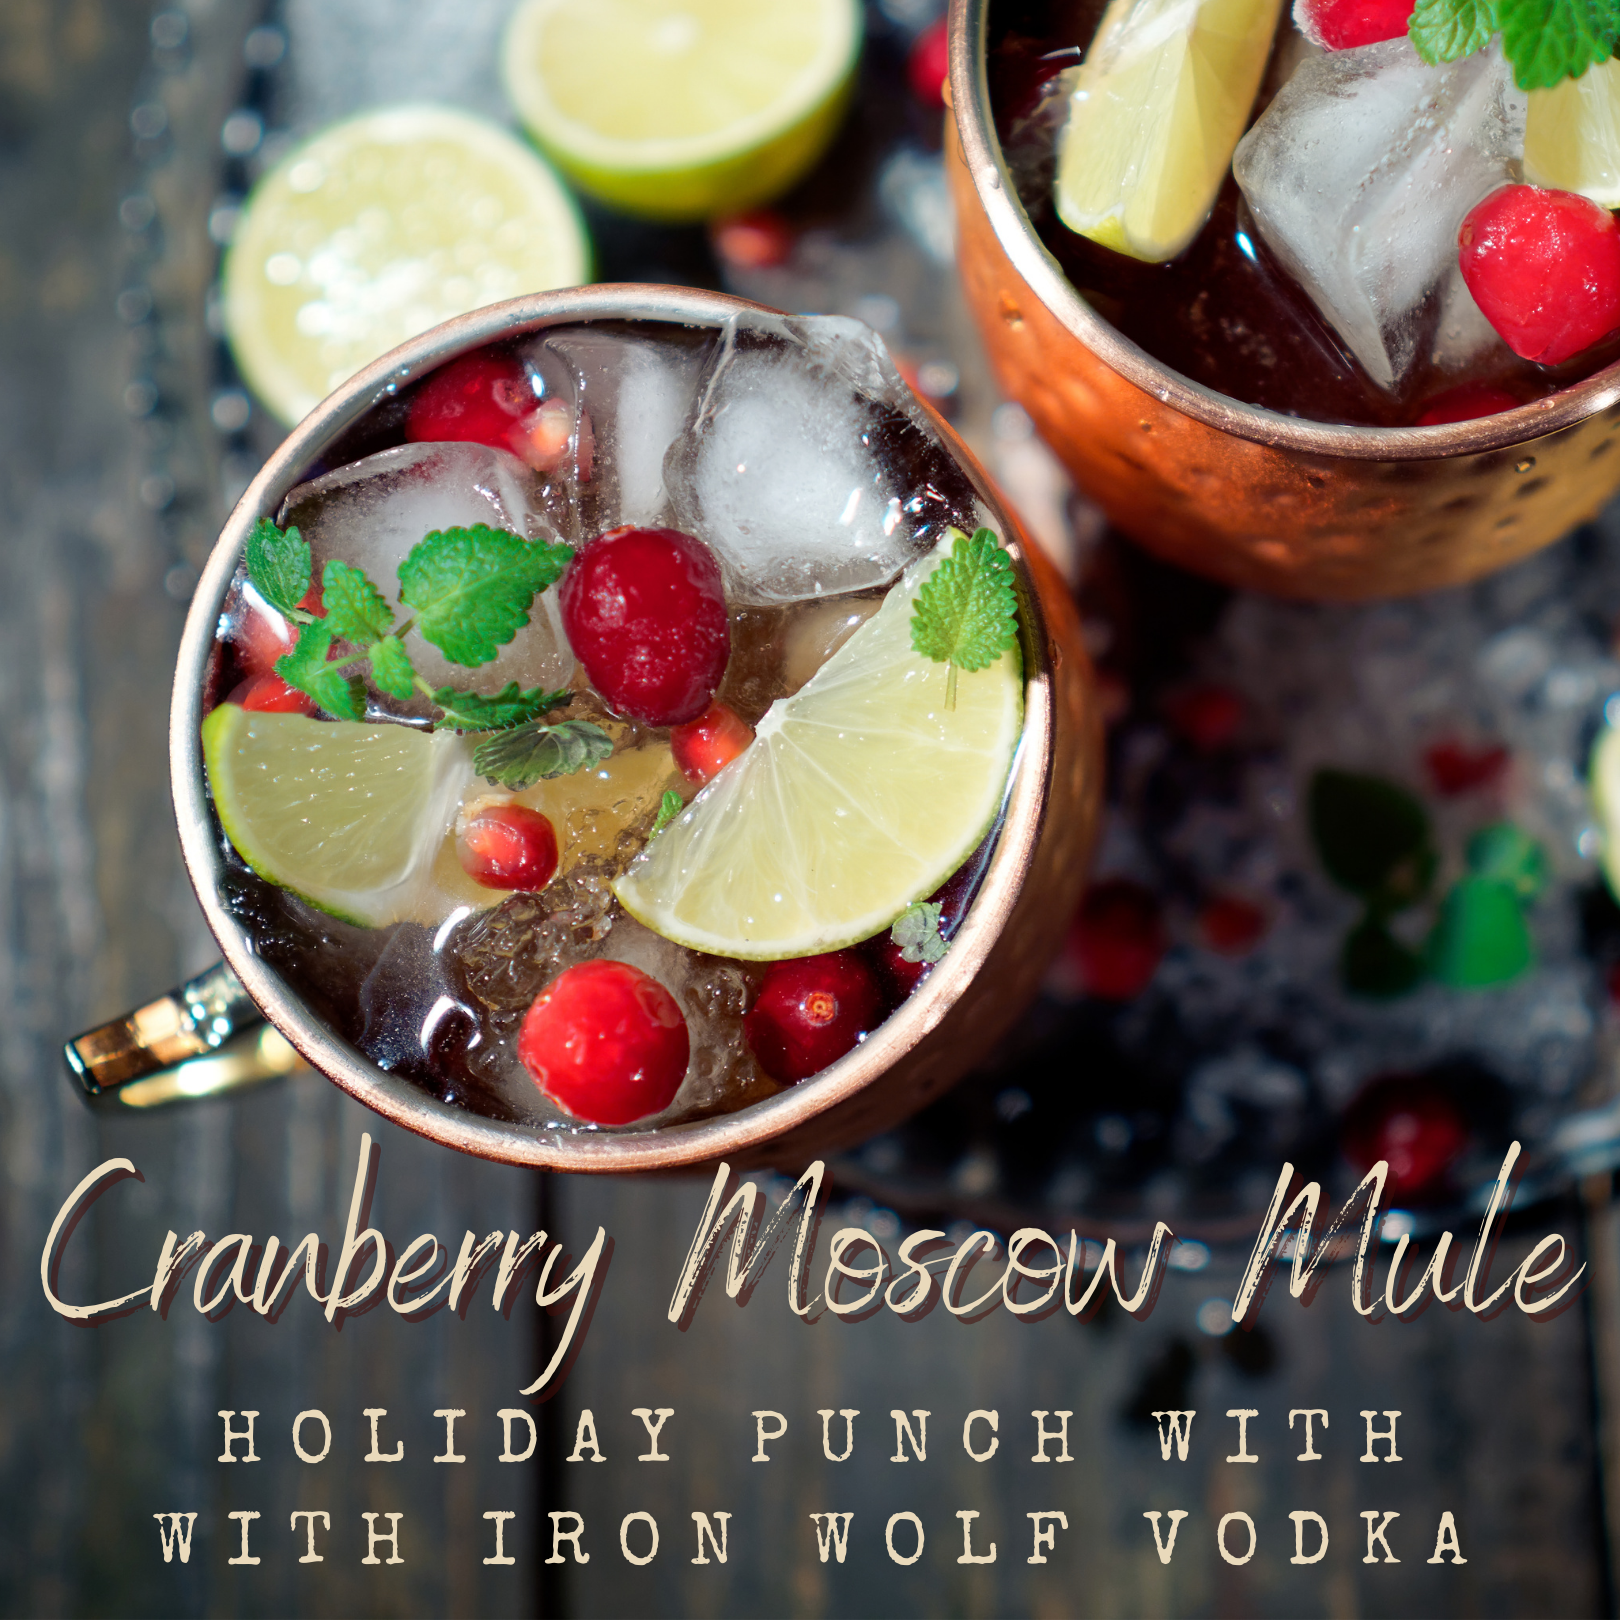 Cranberry Moscow Mule Punch - Vodka